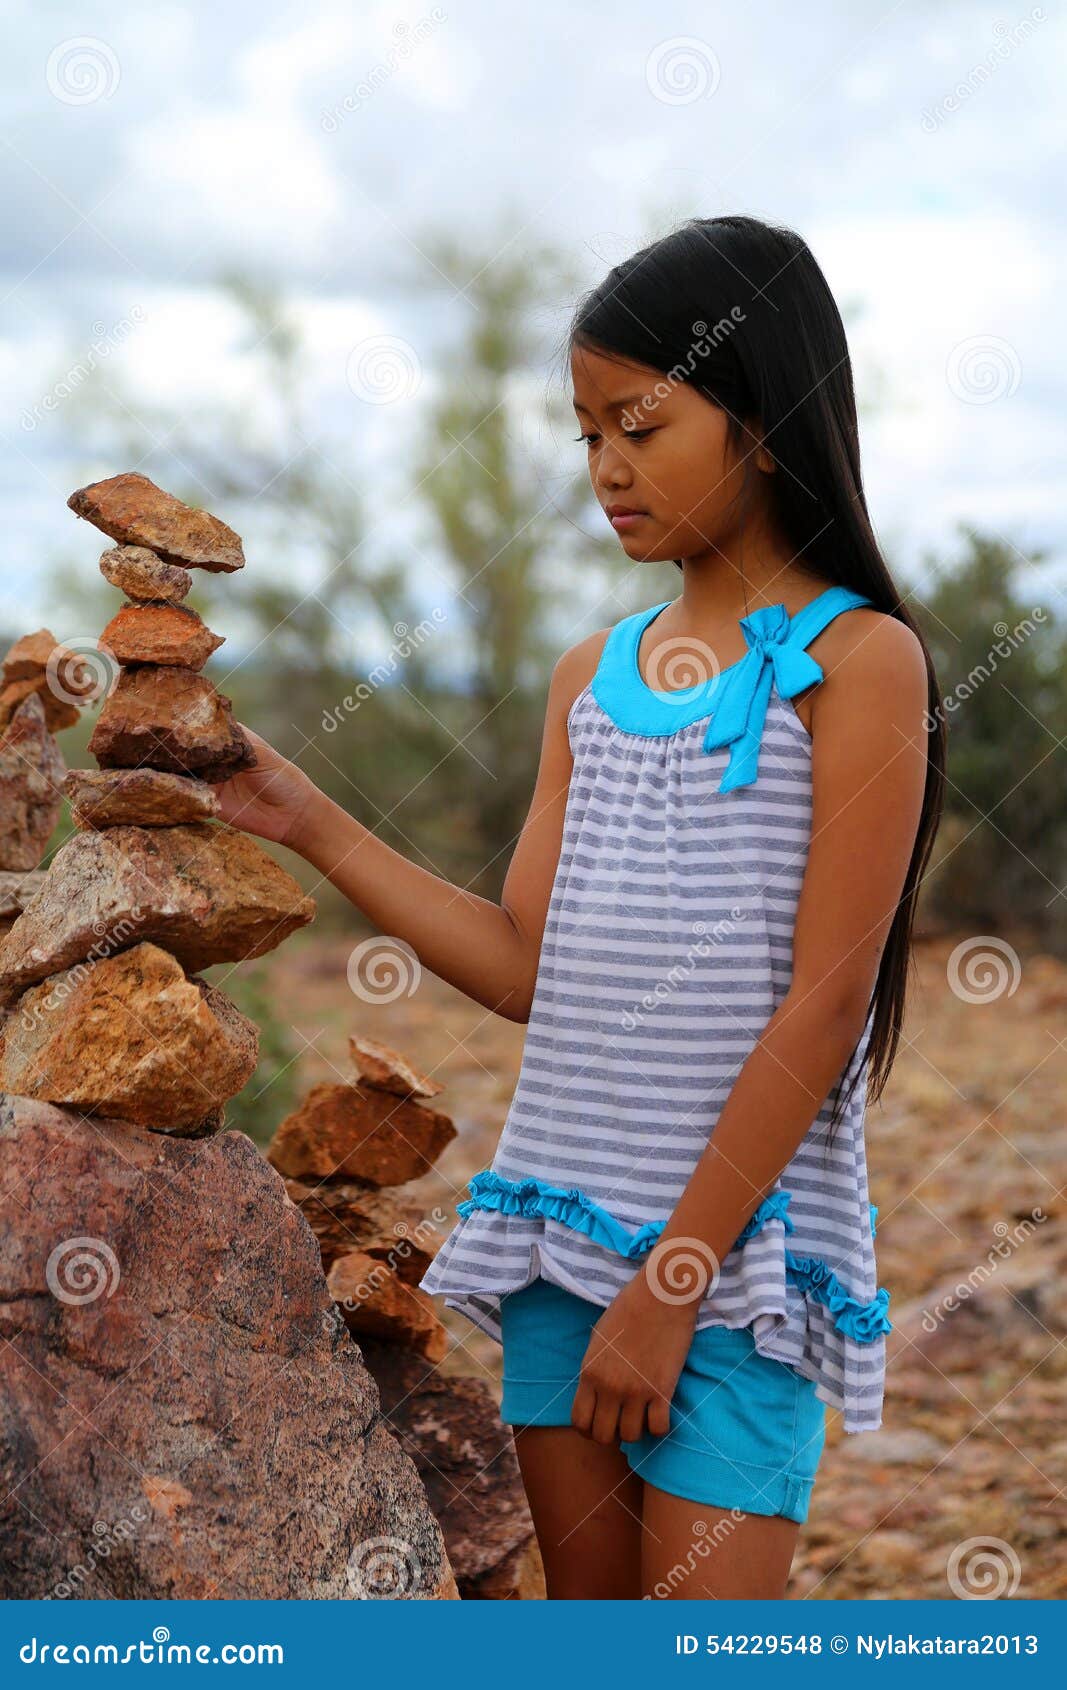 Flat Rocks Stacked On Top Each Stock Photo 1512088805